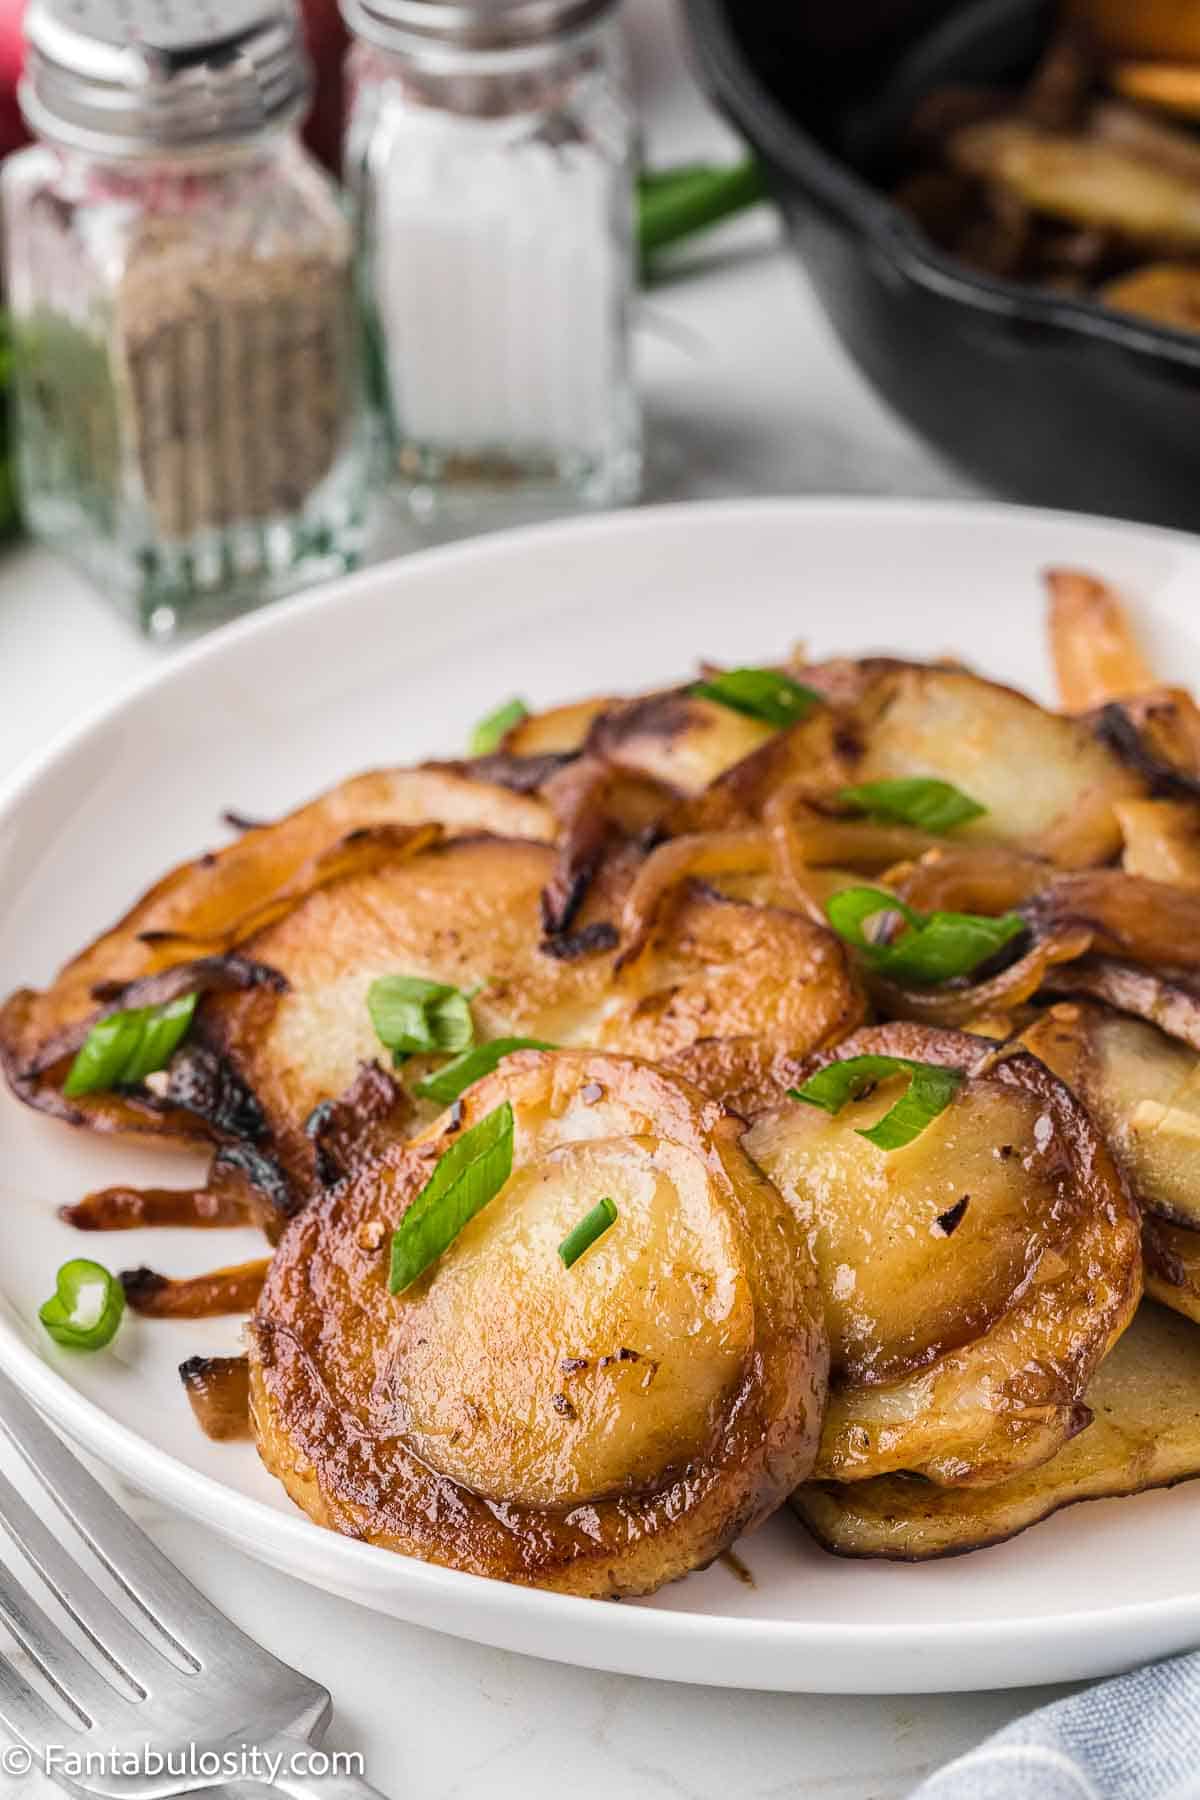 Cooked potatoes and onions on white plate.